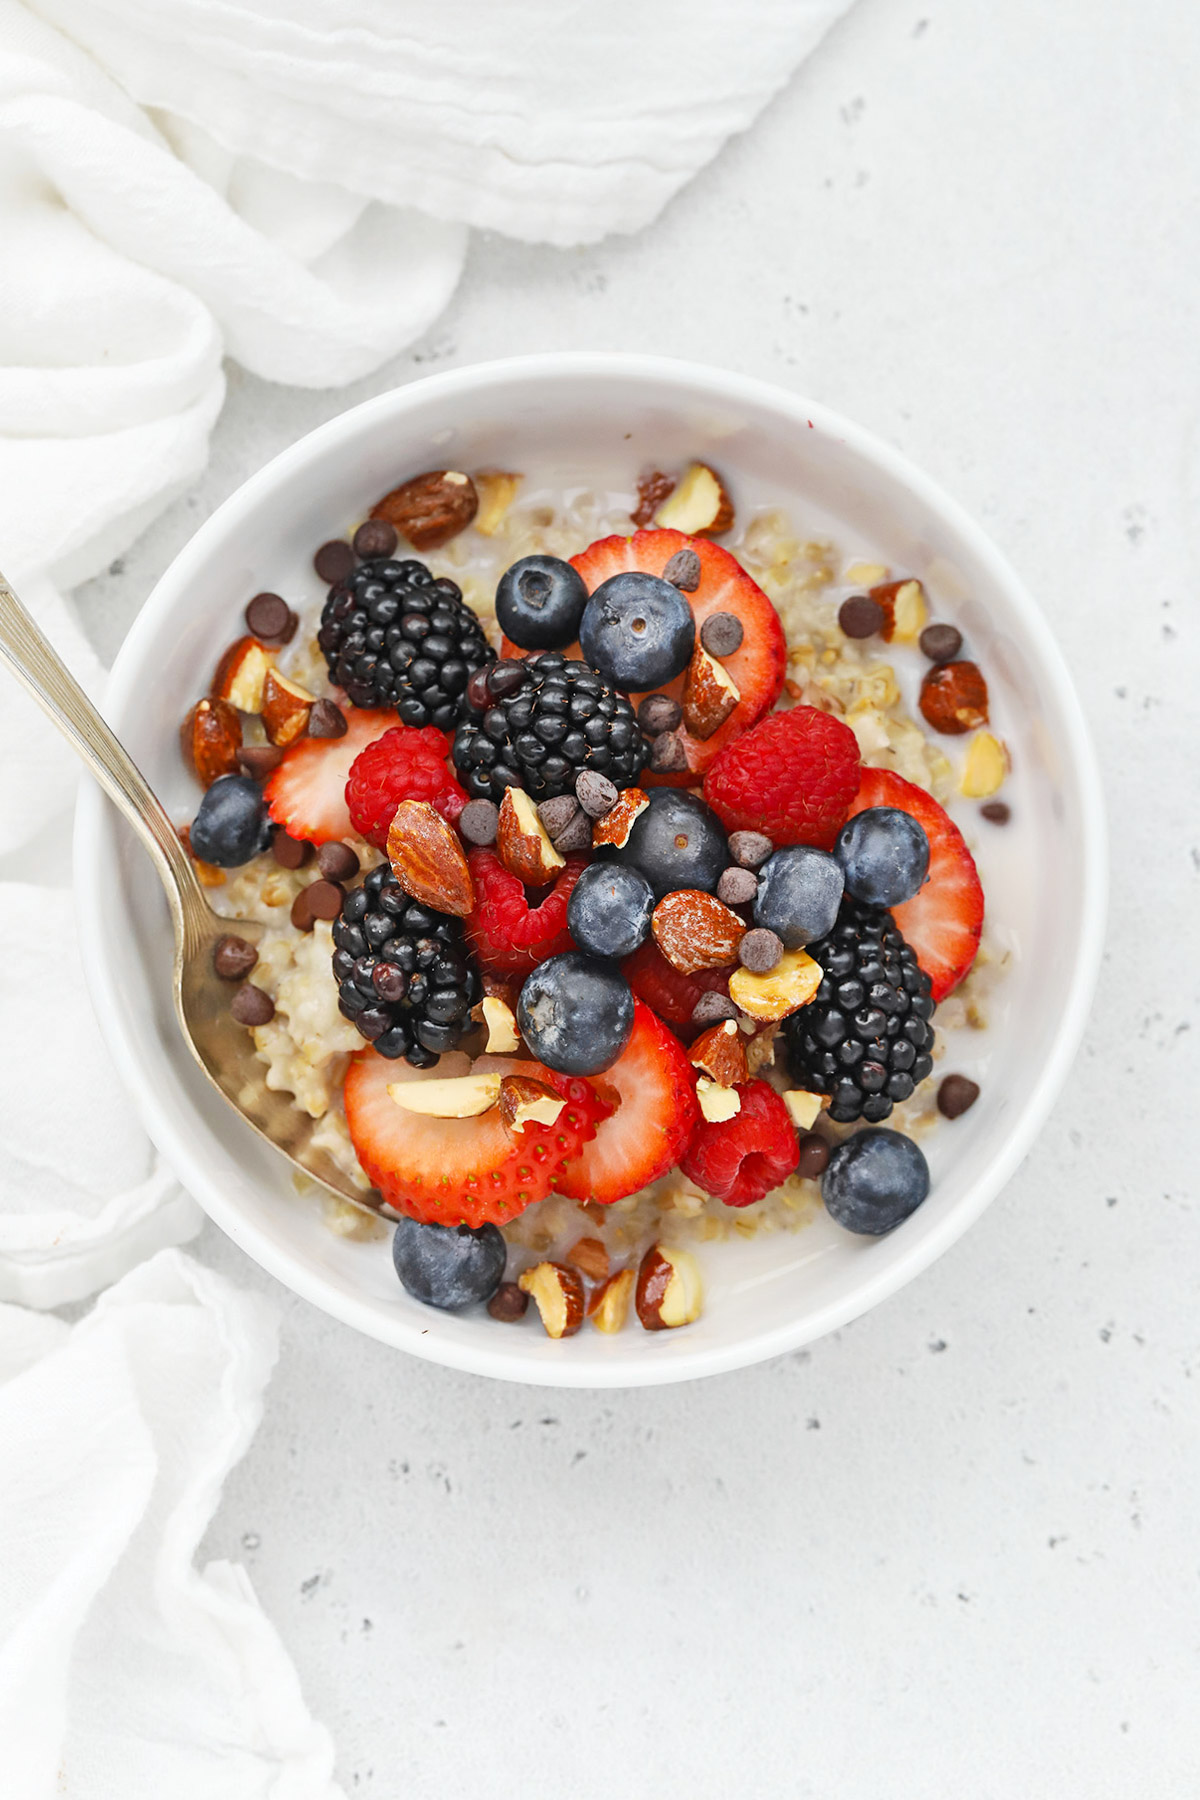 Overhead view of a bowl of stovetop steel-cut oats topped with fresh berries, almonds, and cacao nibs